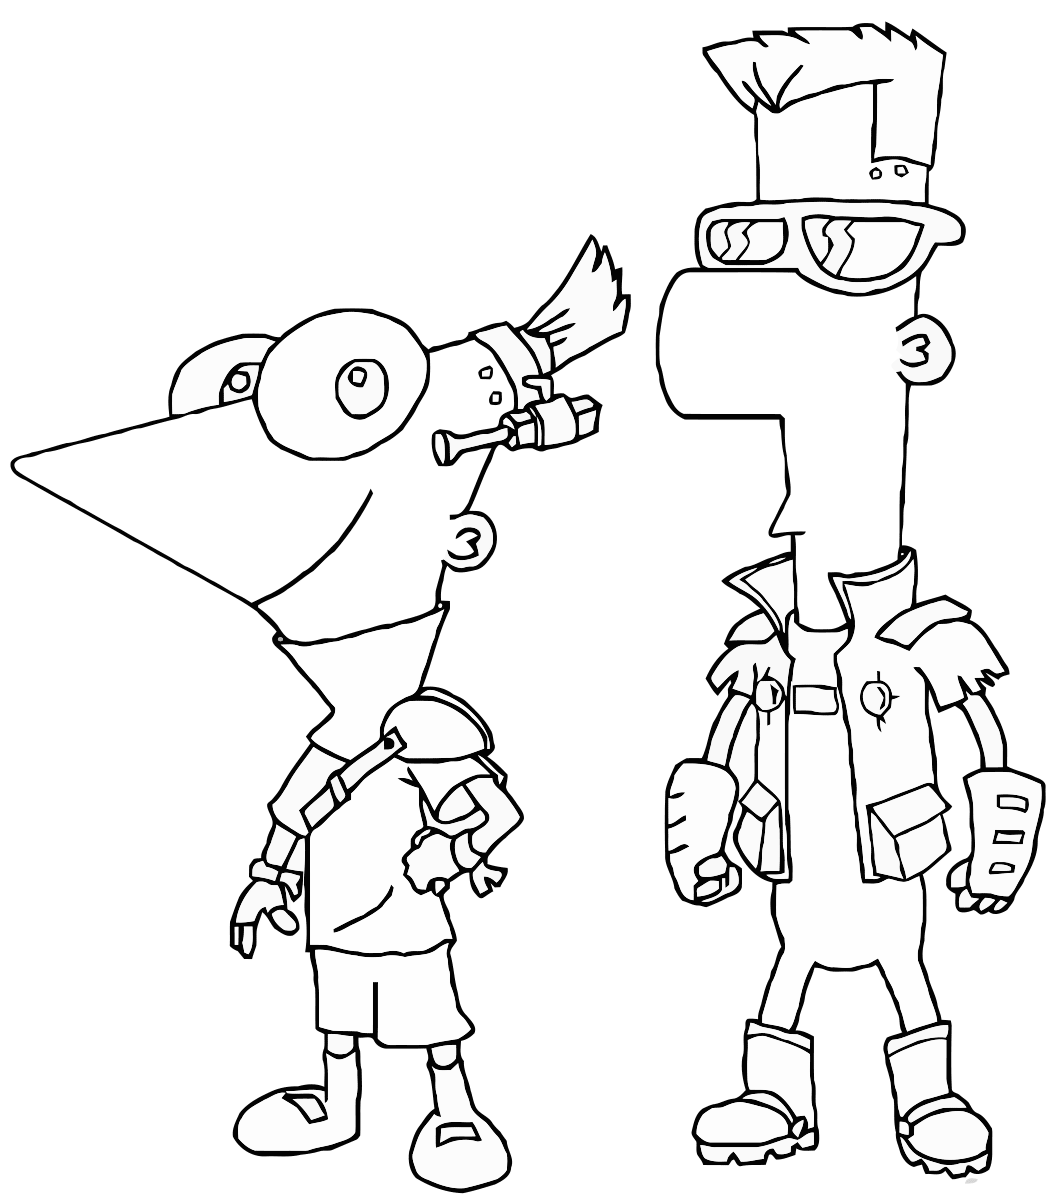 phineas and ferb coloring pages pdf